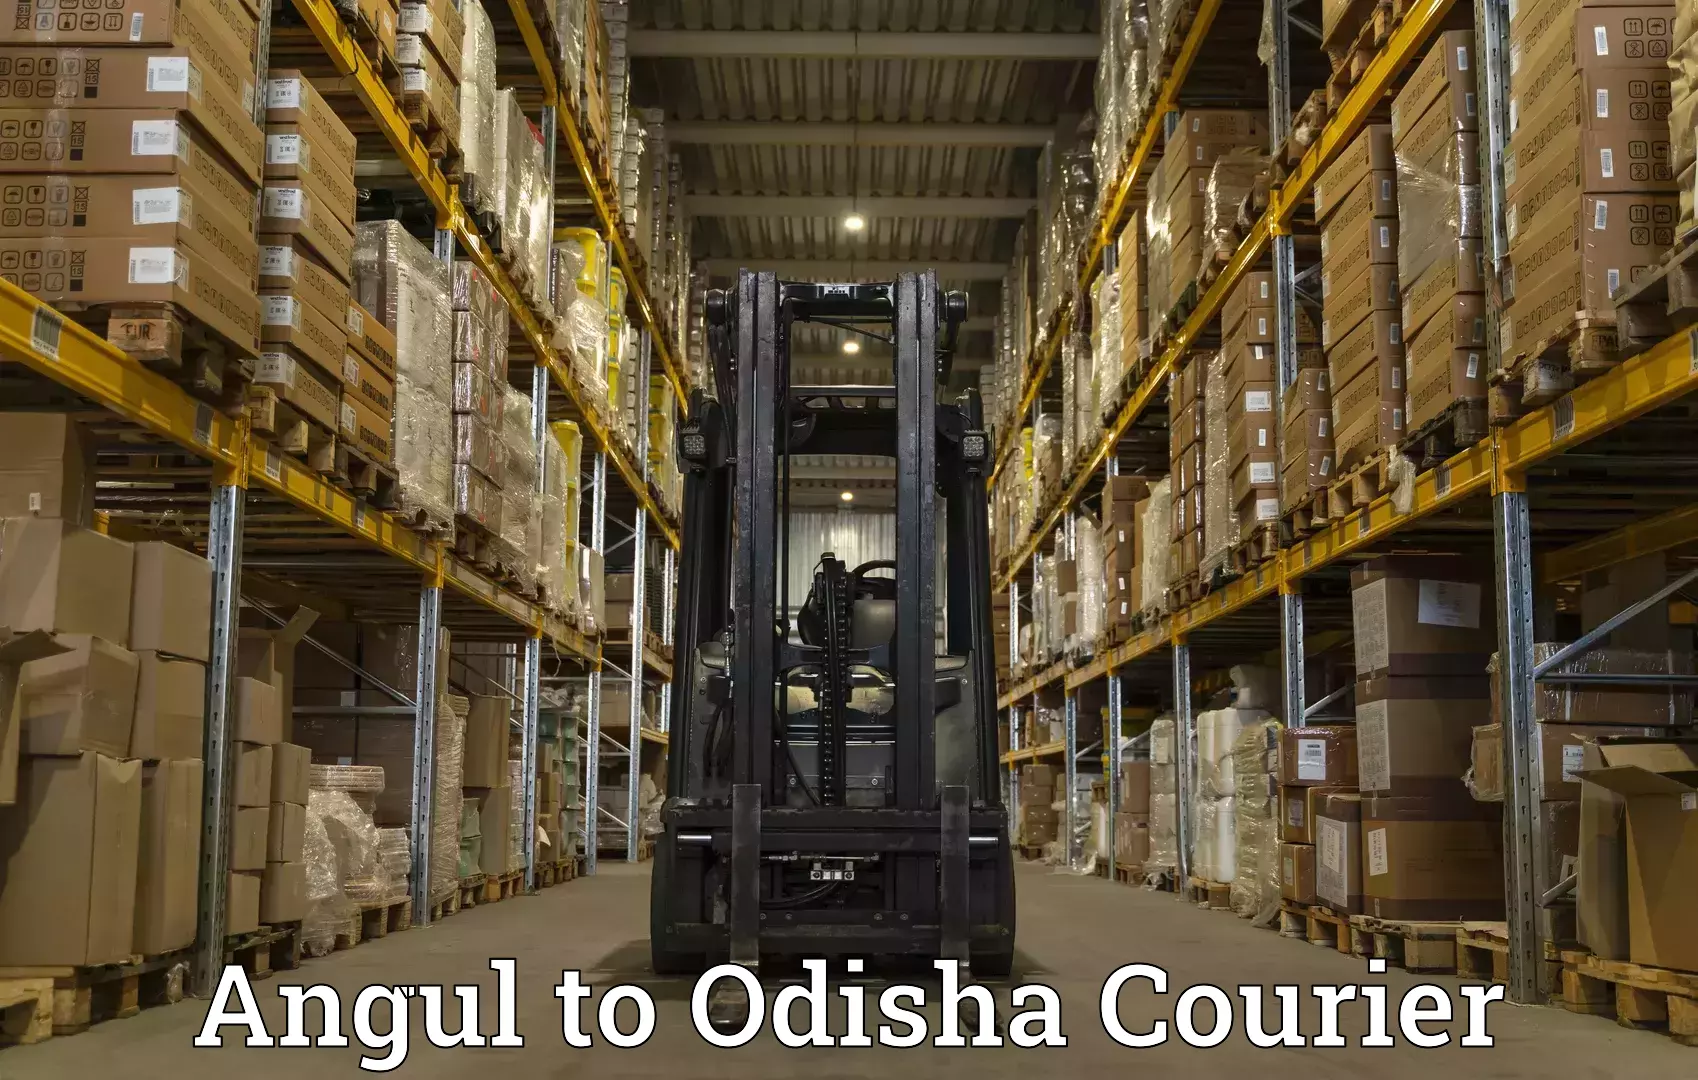 Quality courier services Angul to Paradip Port